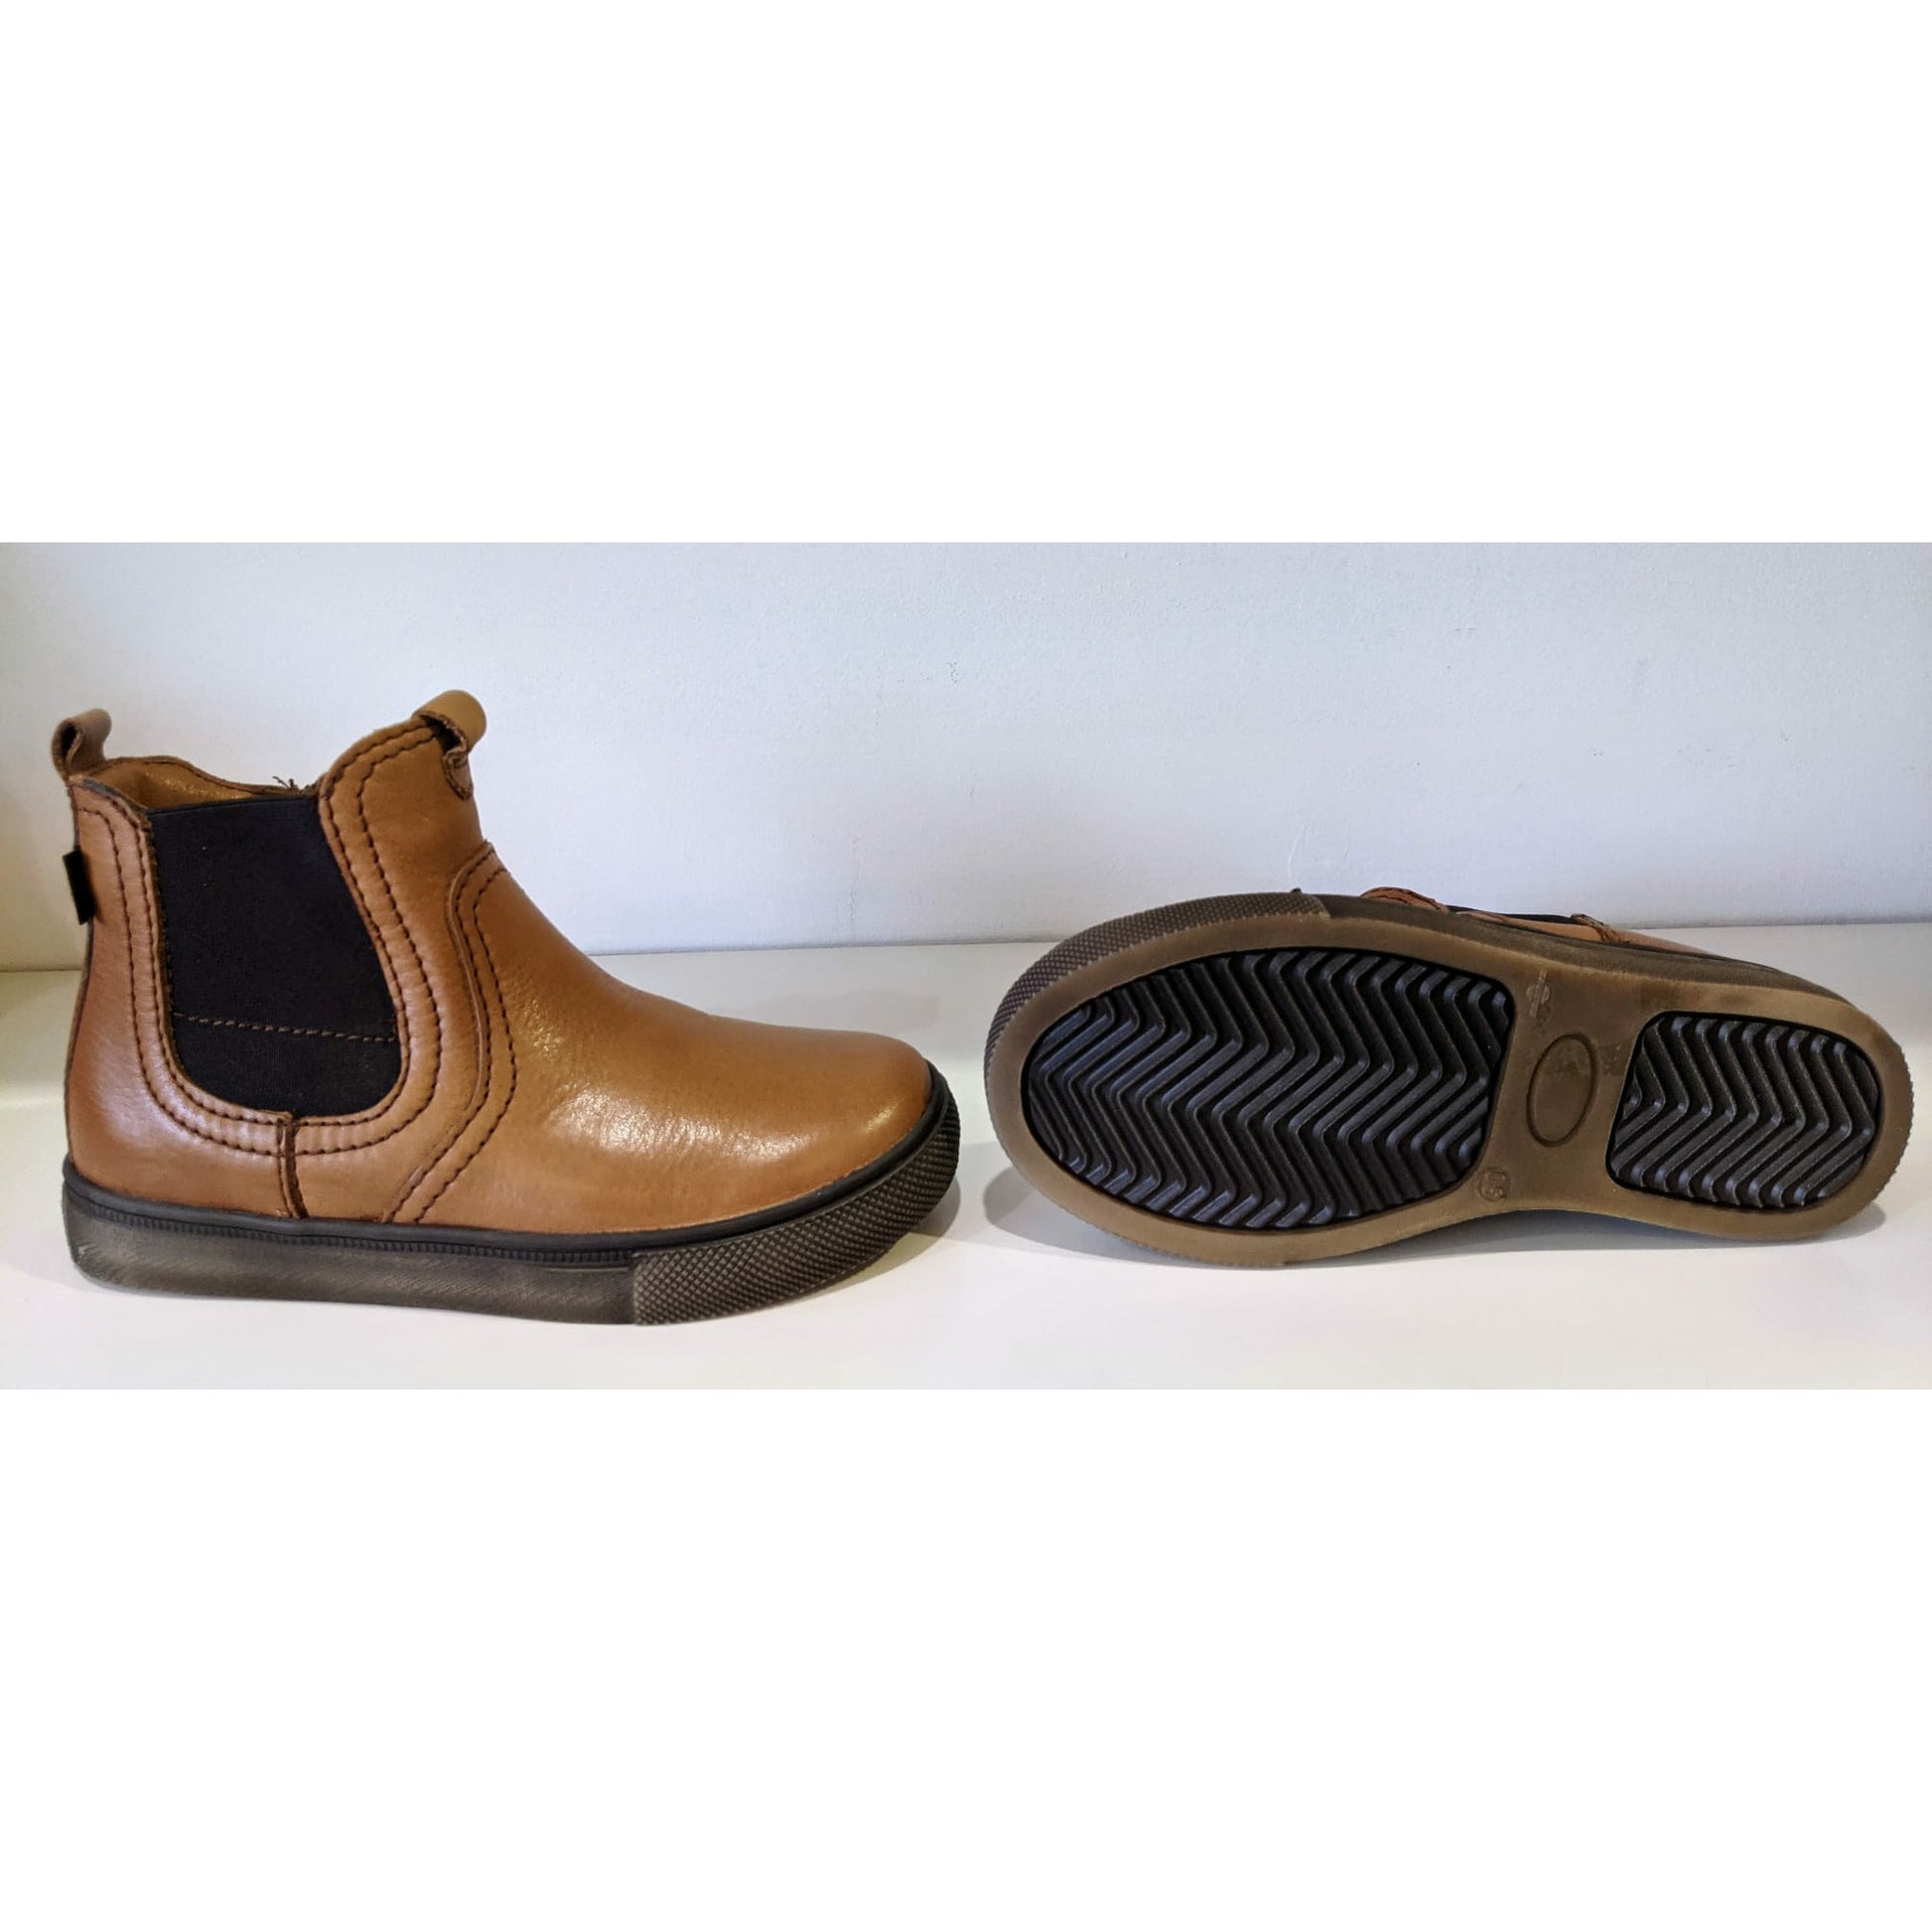 A boys waterproof Chelsea boot by Froddo, style Tomy Tex G3160146-2,in tan leather with zip fastening. View of right side and sole of a pair.